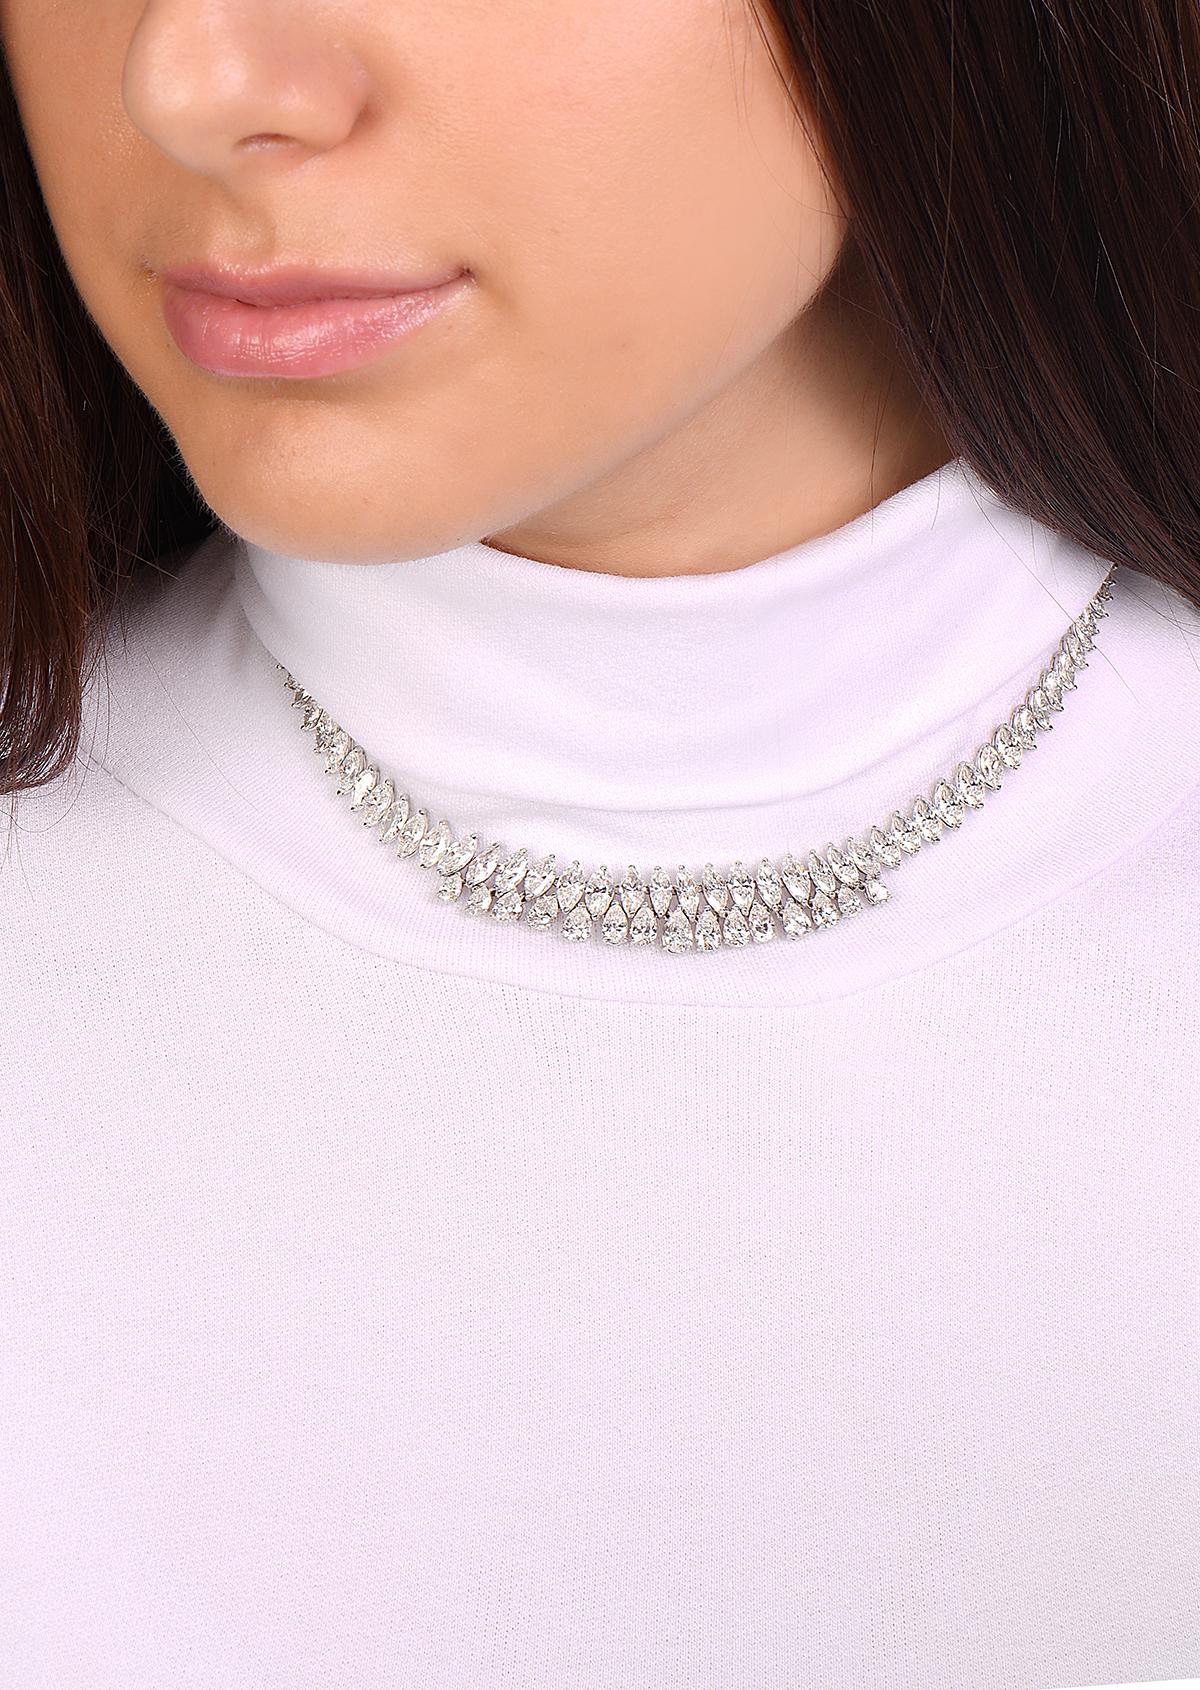 This necklace features 28.72 carats of G-H VS diamonds 15 pears and 20 marquise diamonds set in 18K white gold. This vintage necklace was made in Italy with the highest quality standards of craftsmanship. It has a comfort fit and molds to the curves